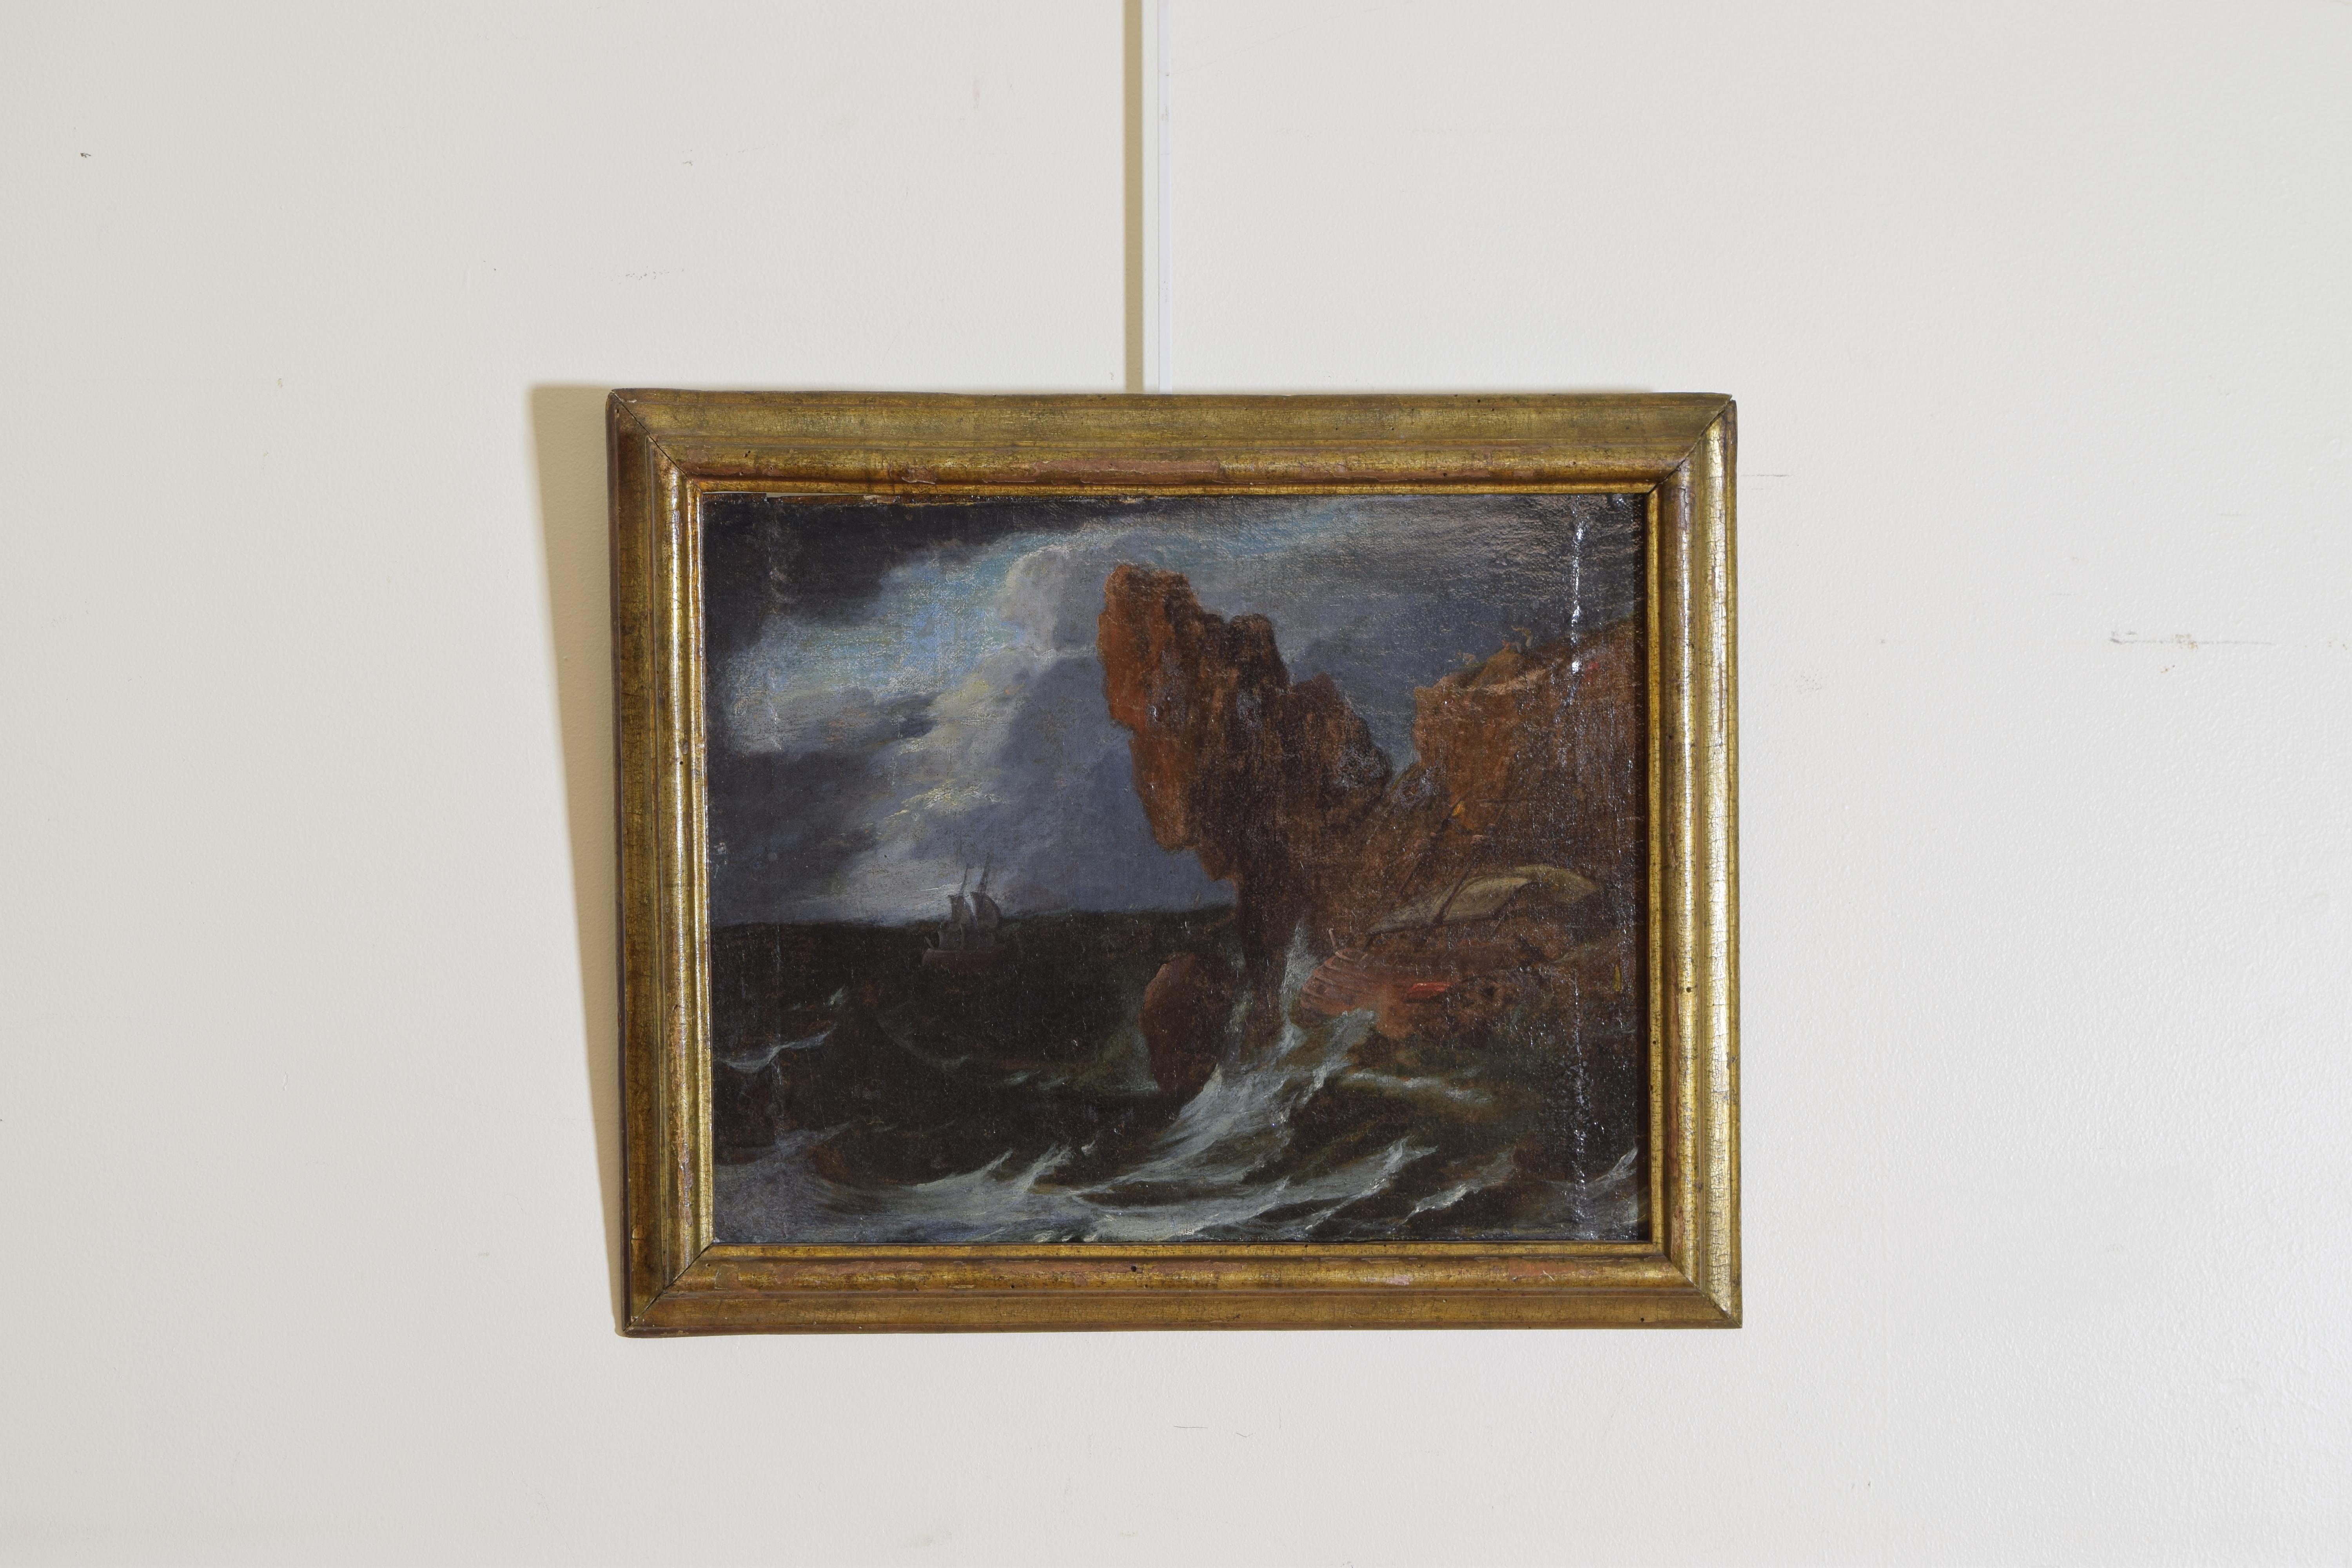 Men desperately try from above to save the ruined vessel as the waves pound it into the cliffs, another galeone passes helplessly in the background with still another in the center background, in a period early 18th century giltwood frame.